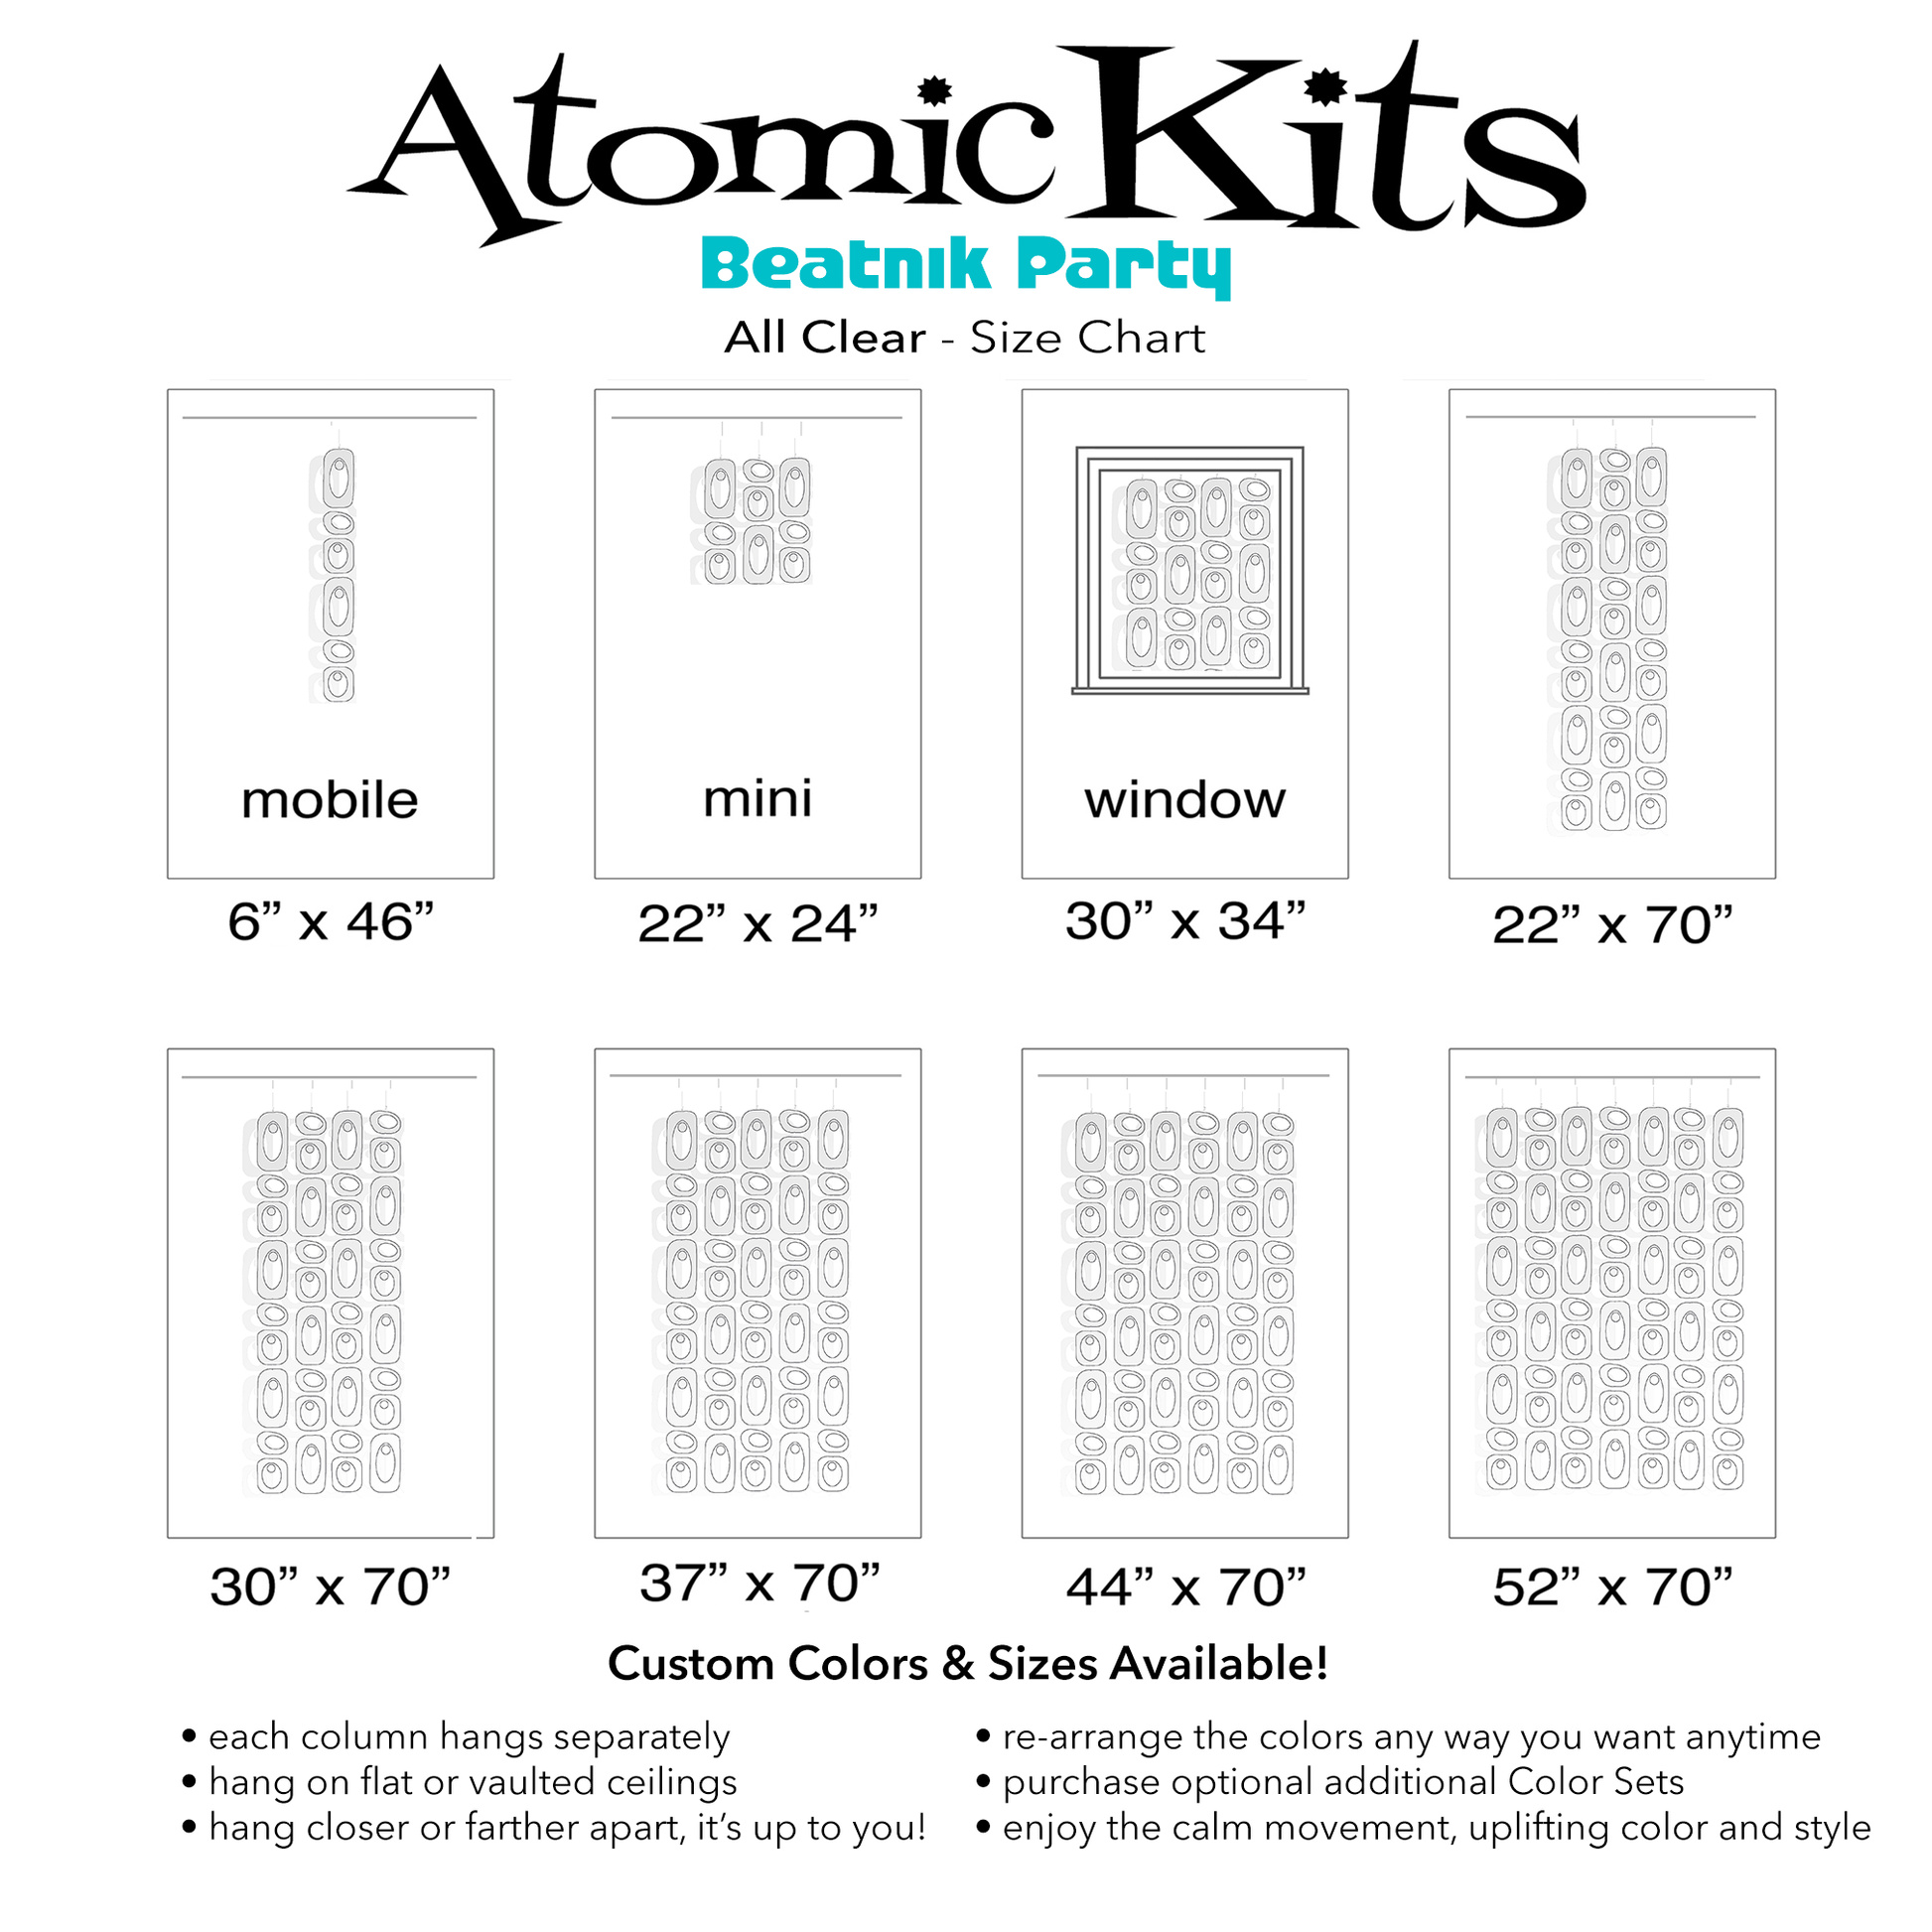 Color Chart for All Clear plexiglass acrylic DIY Atomic Kits  - hanging art mobiles, curtains, room dividers, screens by AtomicMobiles.com